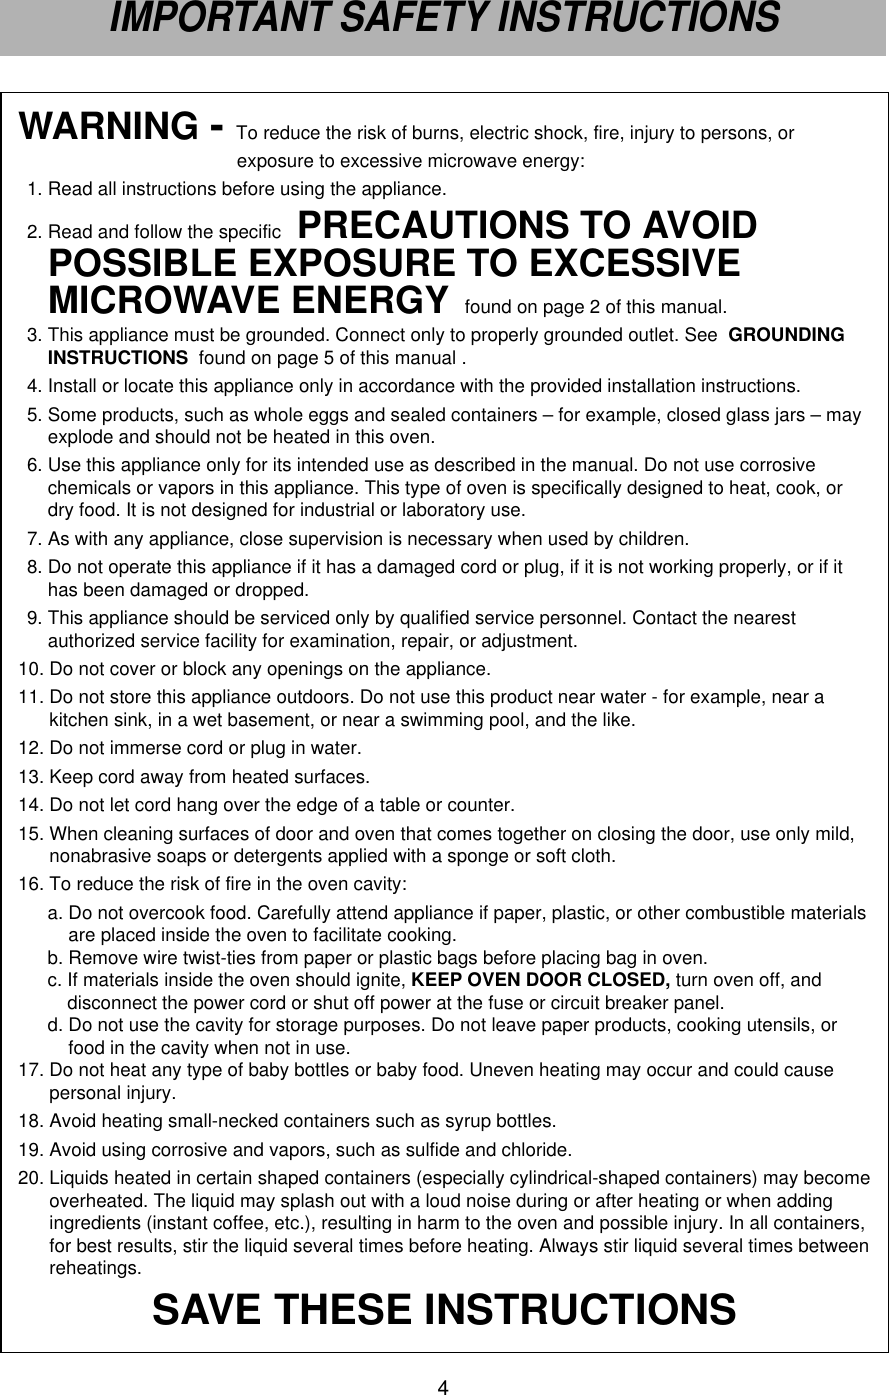 WARNING - To reduce the risk of burns, electric shock, fire, injury to persons, or exposure to excessive microwave energy:1. Read all instructions before using the appliance.2. Read and follow the specific  PRECAUTIONS TO AVOIDPOSSIBLE EXPOSURE TO EXCESSIVEMICROWAVE ENERGY found on page 2 of this manual.3. This appliance must be grounded. Connect only to properly grounded outlet. See  GROUNDINGINSTRUCTIONS  found on page 5 of this manual .4. Install or locate this appliance only in accordance with the provided installation instructions.5. Some products, such as whole eggs and sealed containers – for example, closed glass jars – mayexplode and should not be heated in this oven.6. Use this appliance only for its intended use as described in the manual. Do not use corrosivechemicals or vapors in this appliance. This type of oven is specifically designed to heat, cook, ordry food. It is not designed for industrial or laboratory use.7. As with any appliance, close supervision is necessary when used by children.8. Do not operate this appliance if it has a damaged cord or plug, if it is not working properly, or if ithas been damaged or dropped.9. This appliance should be serviced only by qualified service personnel. Contact the nearestauthorized service facility for examination, repair, or adjustment.10. Do not cover or block any openings on the appliance.11. Do not store this appliance outdoors. Do not use this product near water - for example, near akitchen sink, in a wet basement, or near a swimming pool, and the like.12. Do not immerse cord or plug in water.13. Keep cord away from heated surfaces.14. Do not let cord hang over the edge of a table or counter.15. When cleaning surfaces of door and oven that comes together on closing the door, use only mild,nonabrasive soaps or detergents applied with a sponge or soft cloth.16. To reduce the risk of fire in the oven cavity:a. Do not overcook food. Carefully attend appliance if paper, plastic, or other combustible materialsare placed inside the oven to facilitate cooking.b. Remove wire twist-ties from paper or plastic bags before placing bag in oven.c. If materials inside the oven should ignite, KEEP OVEN DOOR CLOSED, turn oven off, anddisconnect the power cord or shut off power at the fuse or circuit breaker panel.d. Do not use the cavity for storage purposes. Do not leave paper products, cooking utensils, orfood in the cavity when not in use.17. Do not heat any type of baby bottles or baby food. Uneven heating may occur and could causepersonal injury.18. Avoid heating small-necked containers such as syrup bottles.19. Avoid using corrosive and vapors, such as sulfide and chloride.20. Liquids heated in certain shaped containers (especially cylindrical-shaped containers) may becomeoverheated. The liquid may splash out with a loud noise during or after heating or when addingingredients (instant coffee, etc.), resulting in harm to the oven and possible injury. In all containers,for best results, stir the liquid several times before heating. Always stir liquid several times betweenreheatings.SAVE THESE INSTRUCTIONS4IMPORTANT SAFETY INSTRUCTIONS